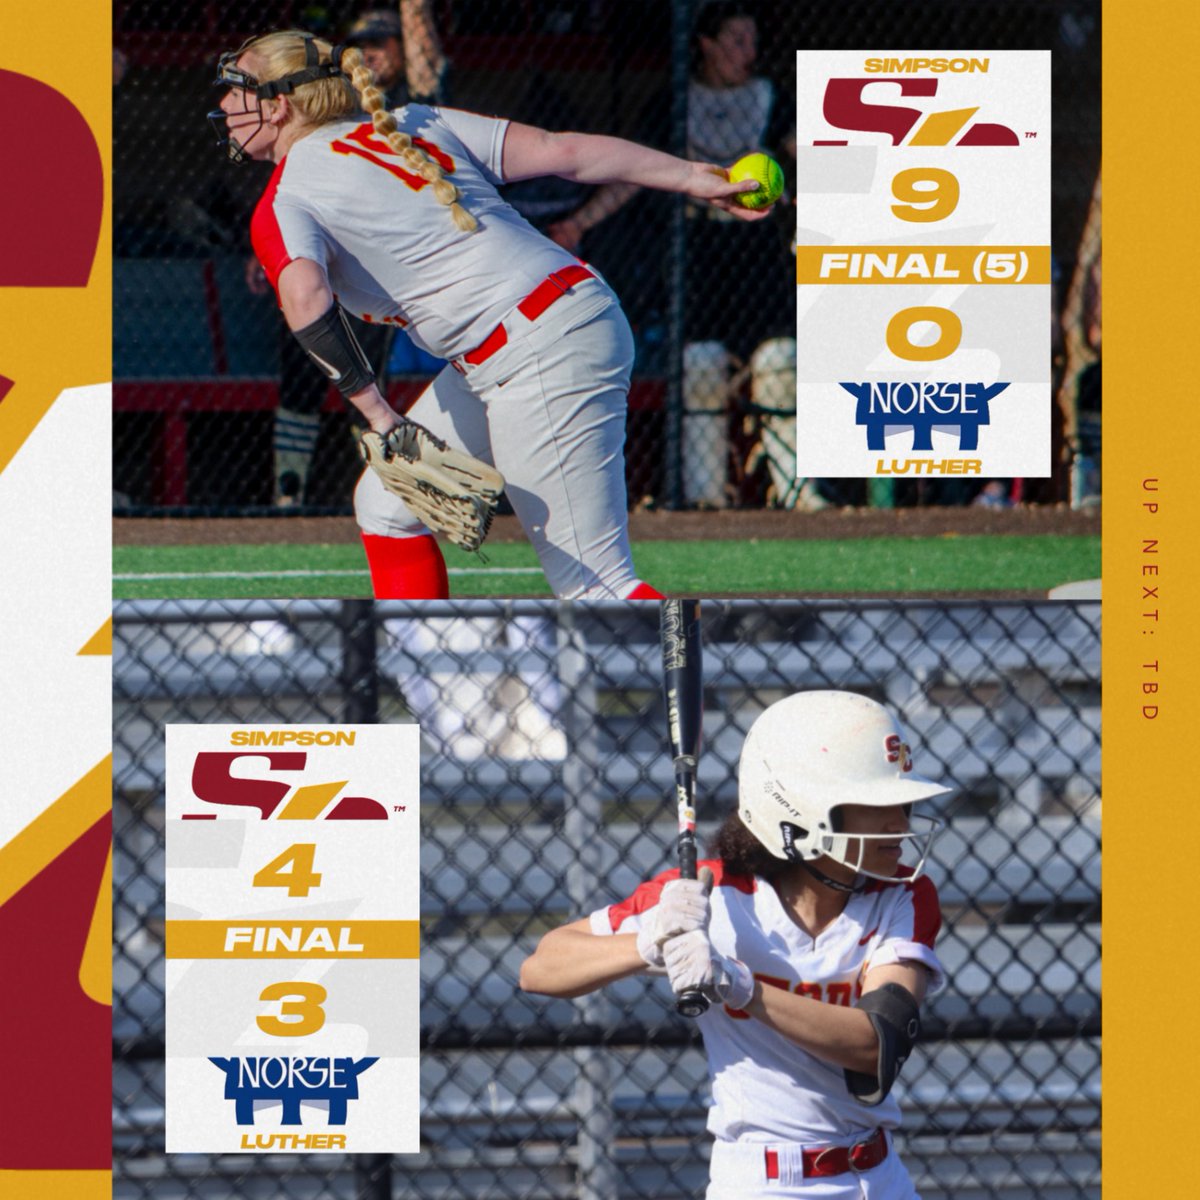 That is a Storm sweep! Simpson takes the doubleheader against Luther and clinches a spot in next week's American Rivers Conference Tournament! #rollriversSB